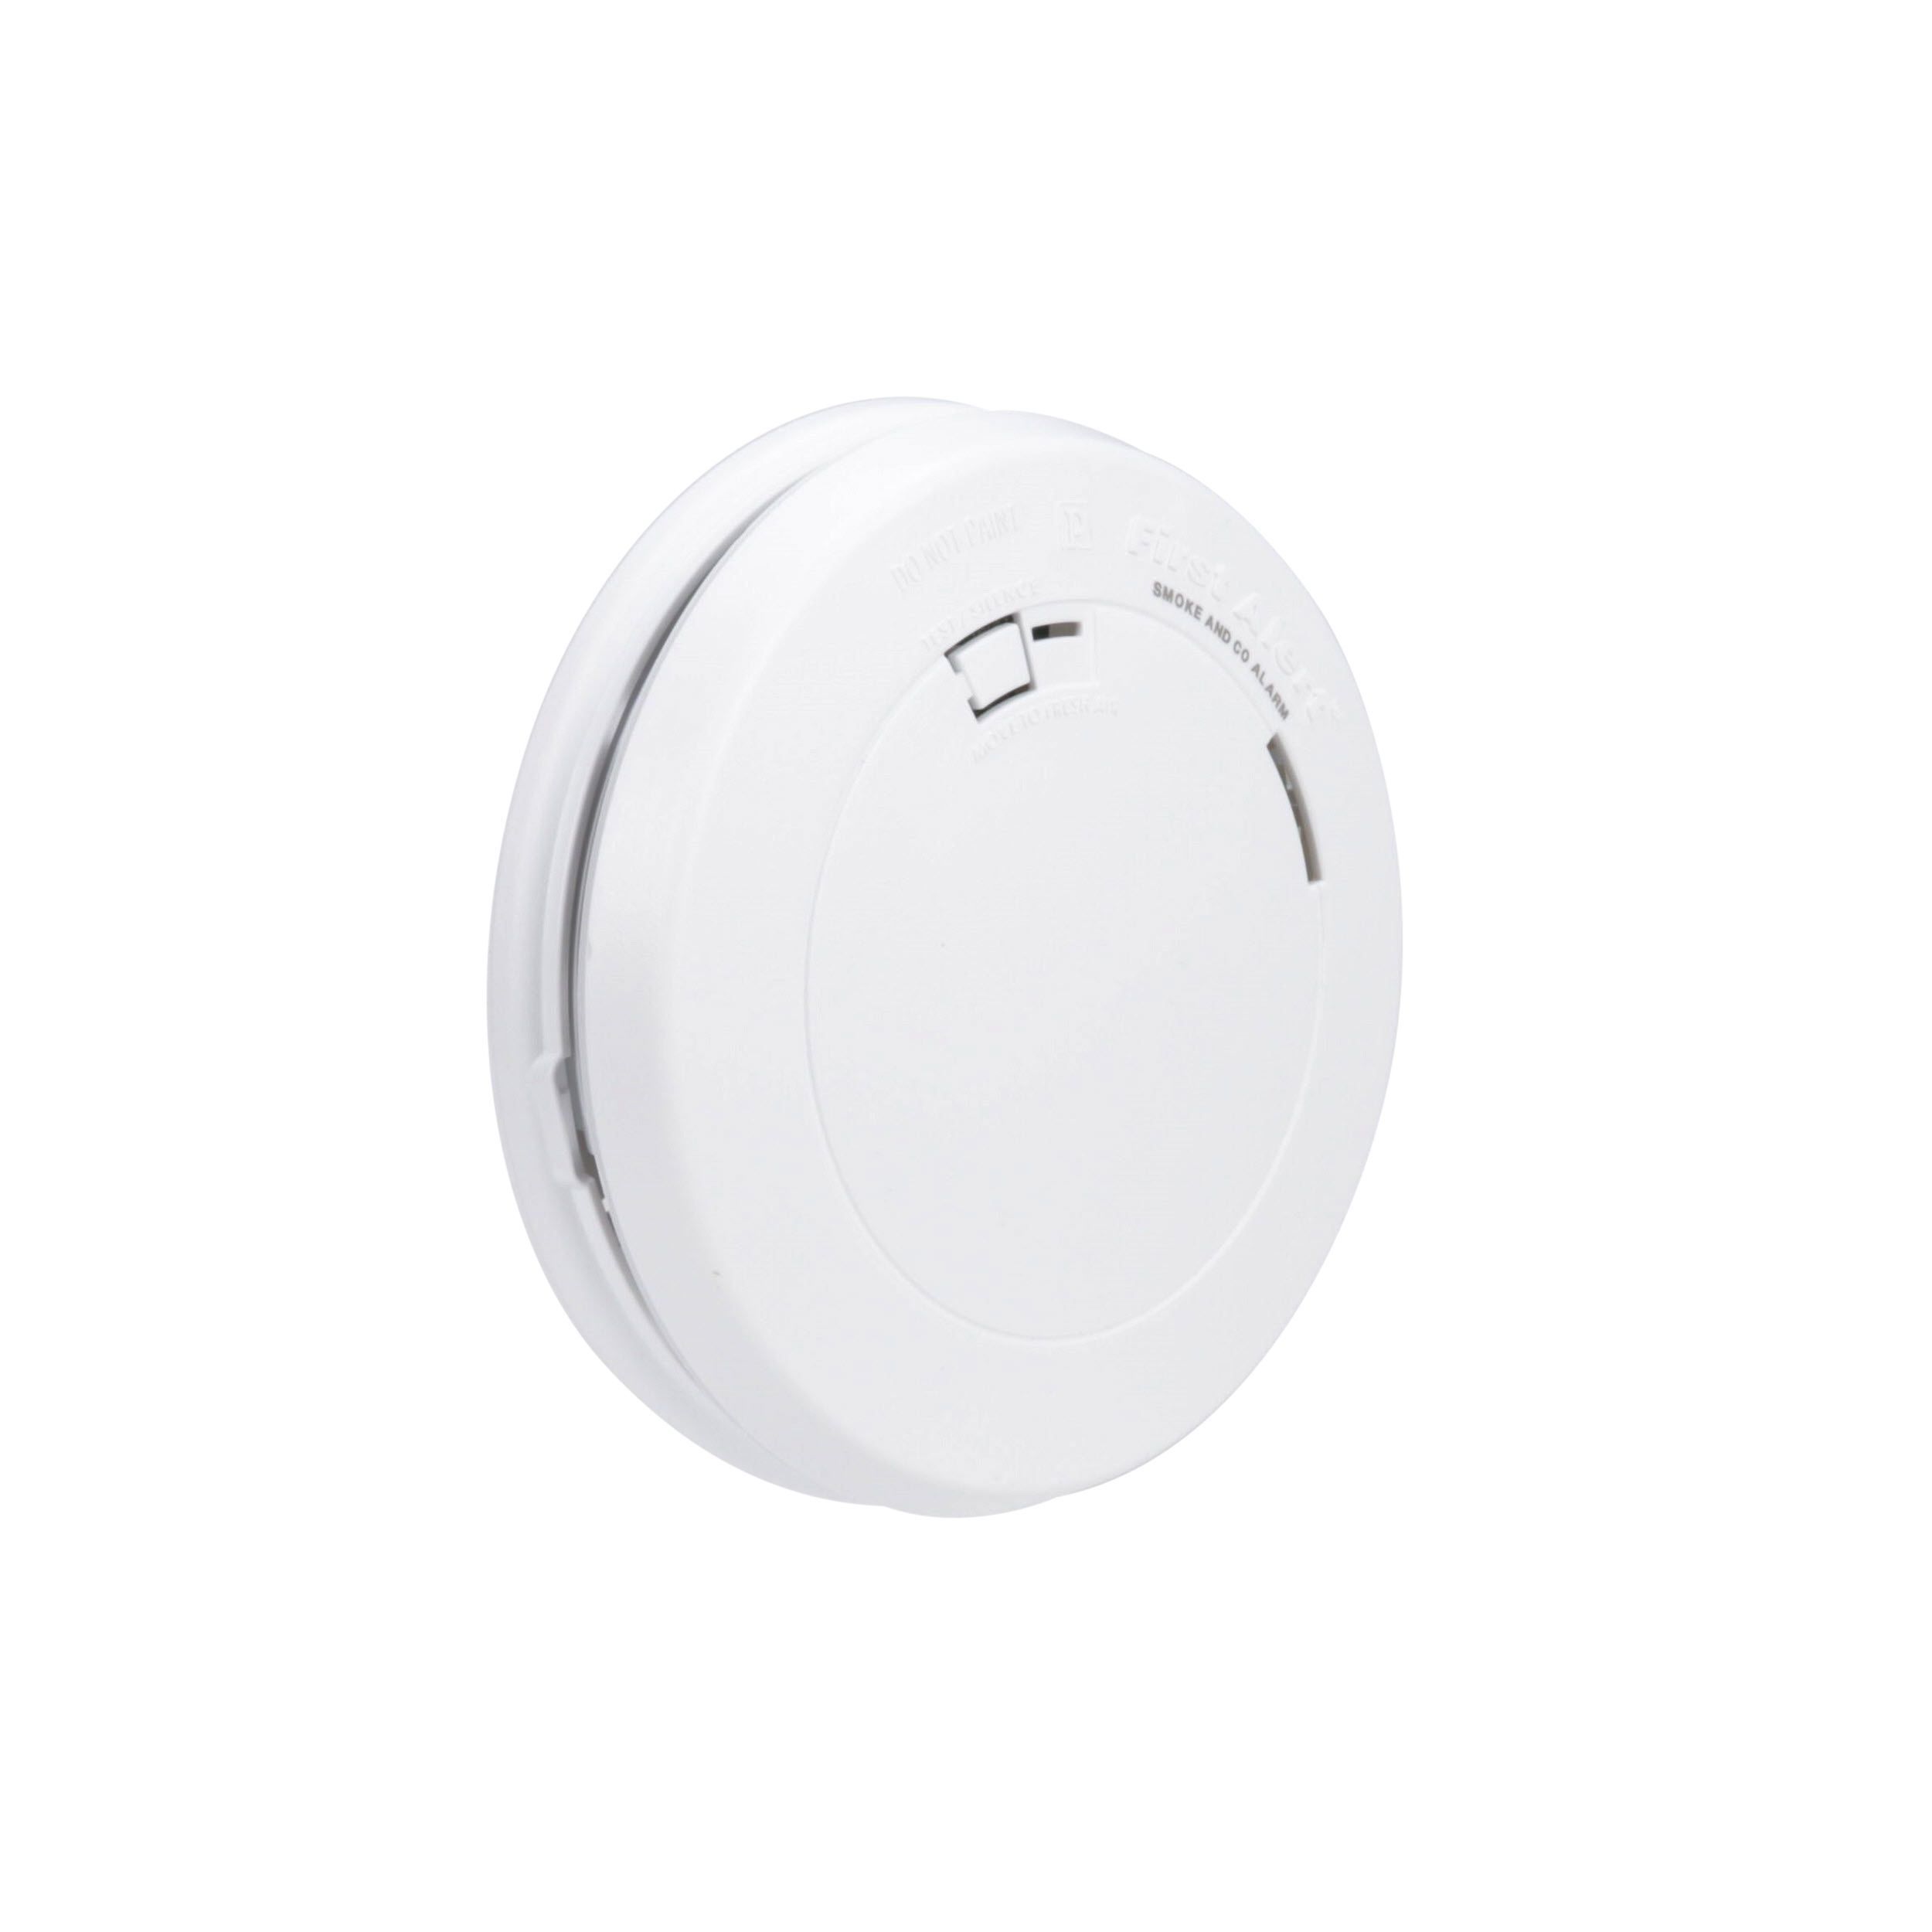 Details about   First Alert smoke/carbon monoxide alarm 10-year battery 6-PACK 1040957 